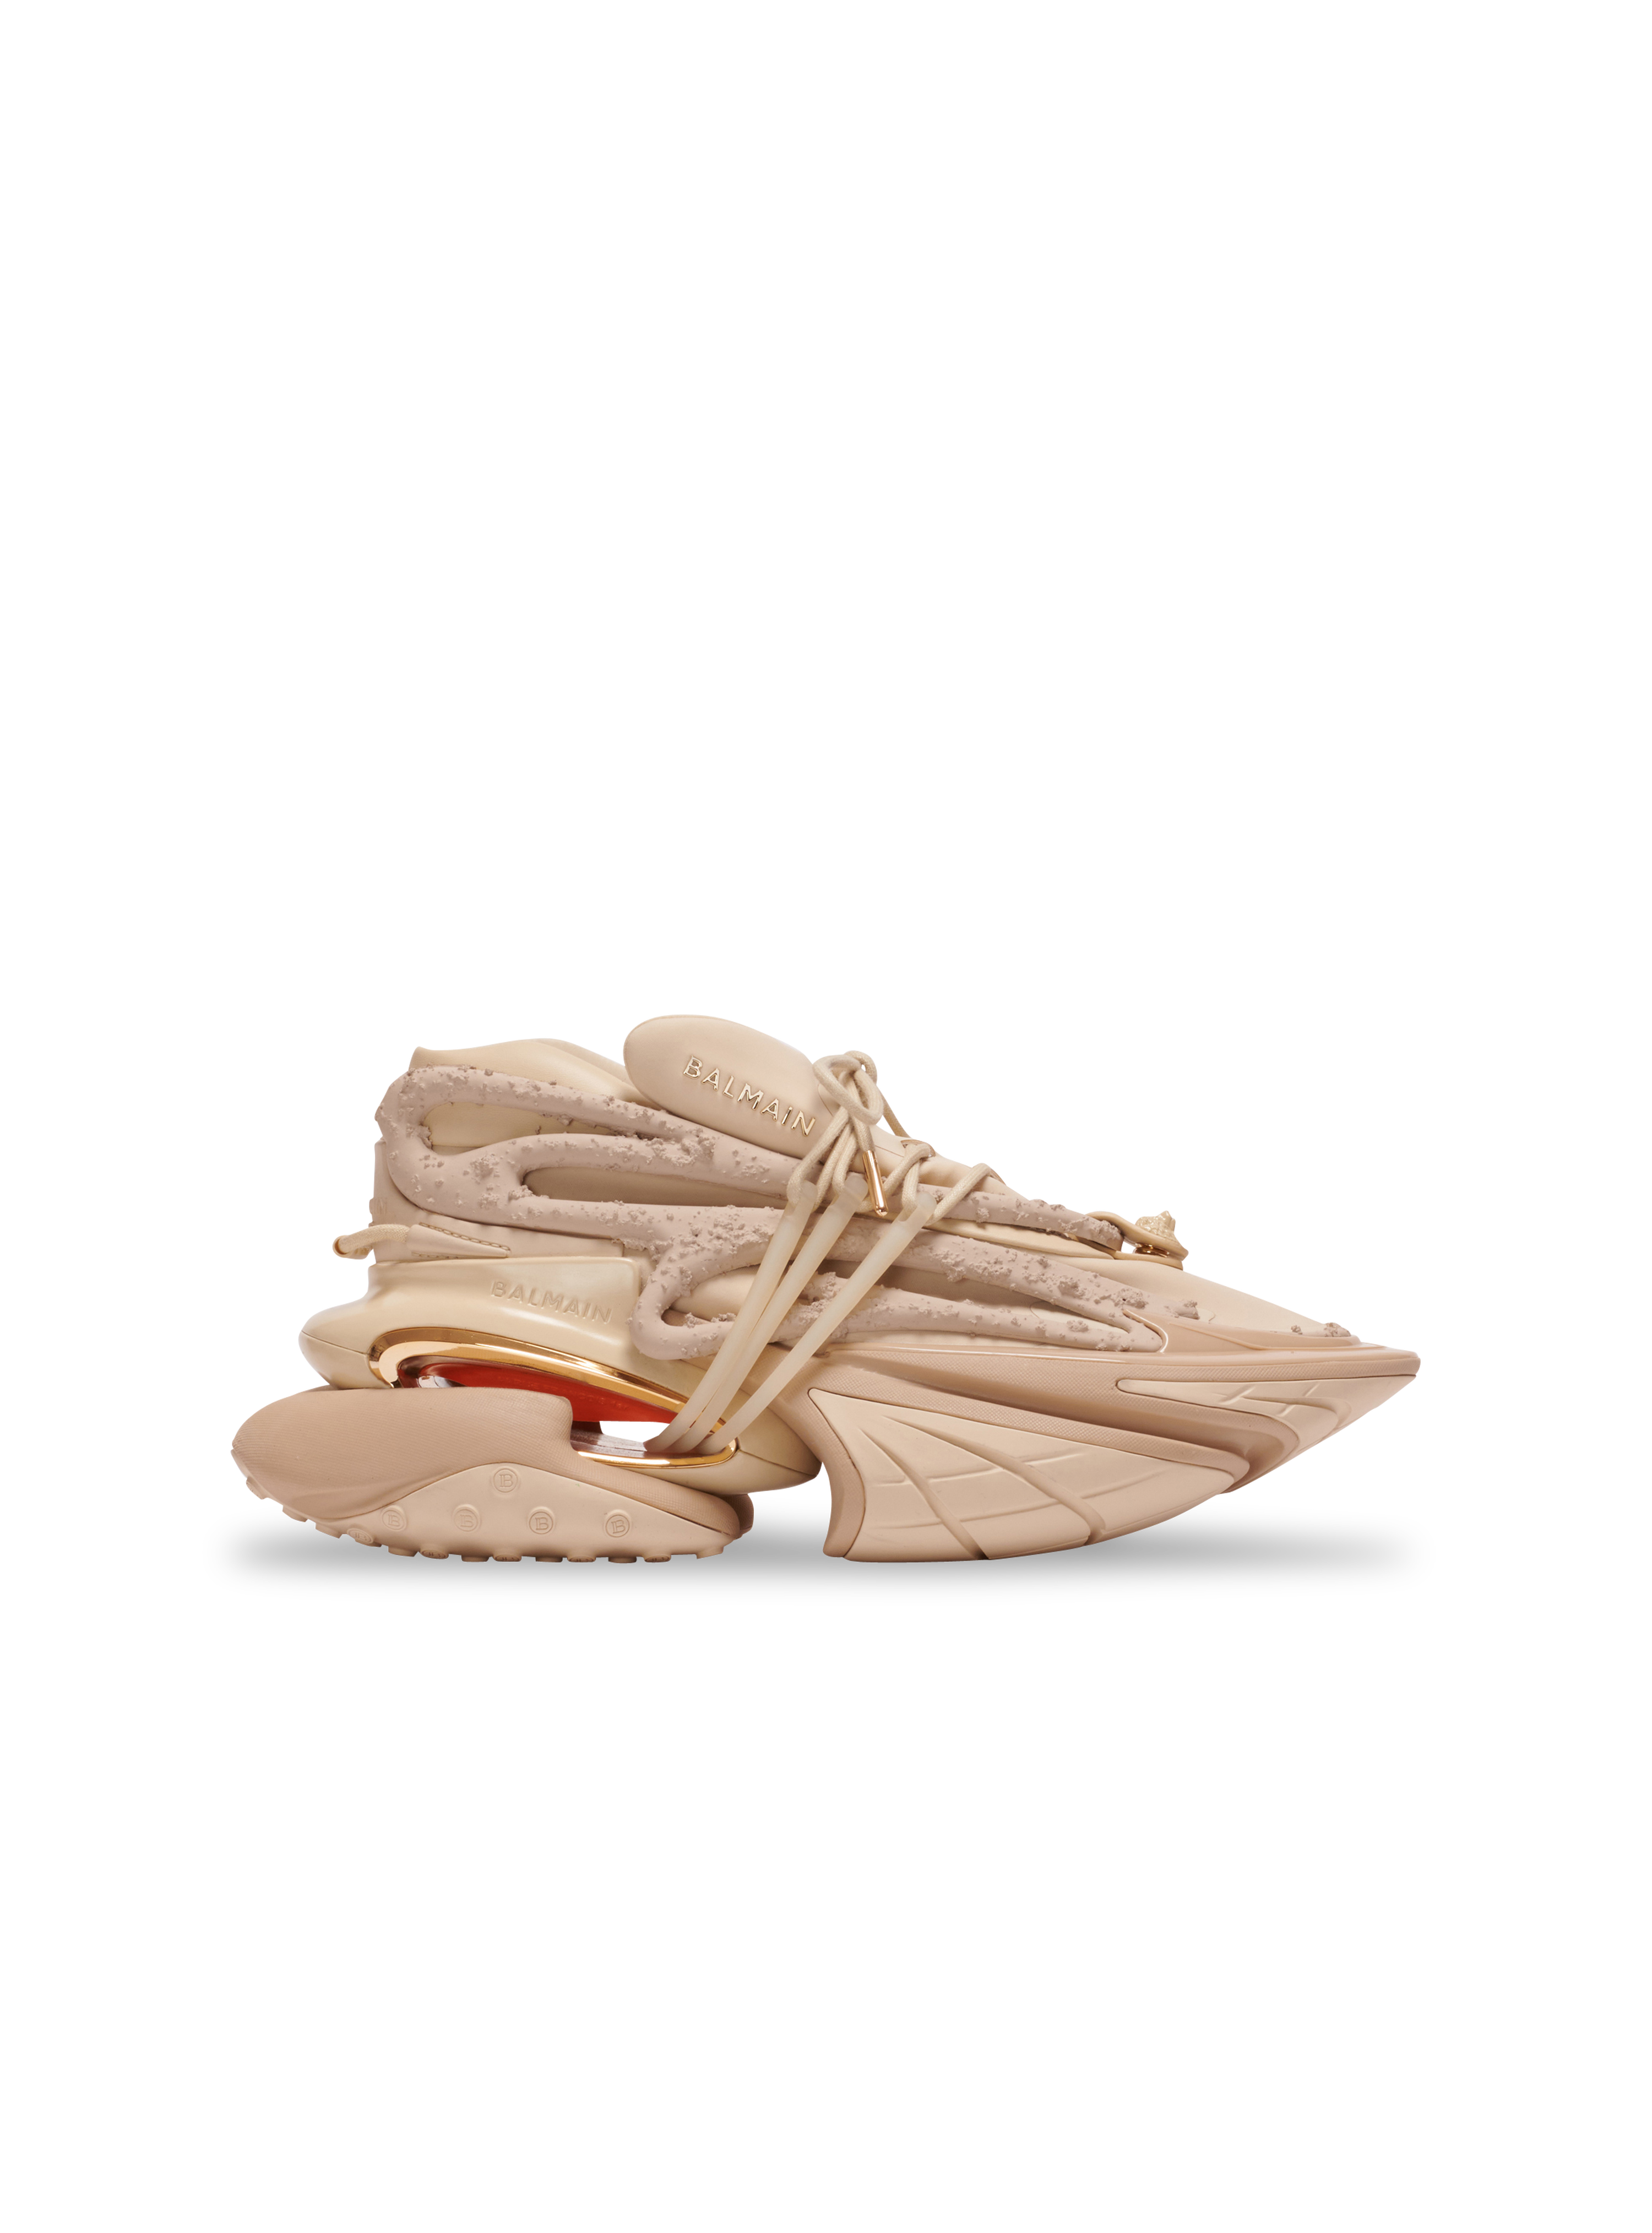 Unicorn low-top trainers in neoprene and leather, beige